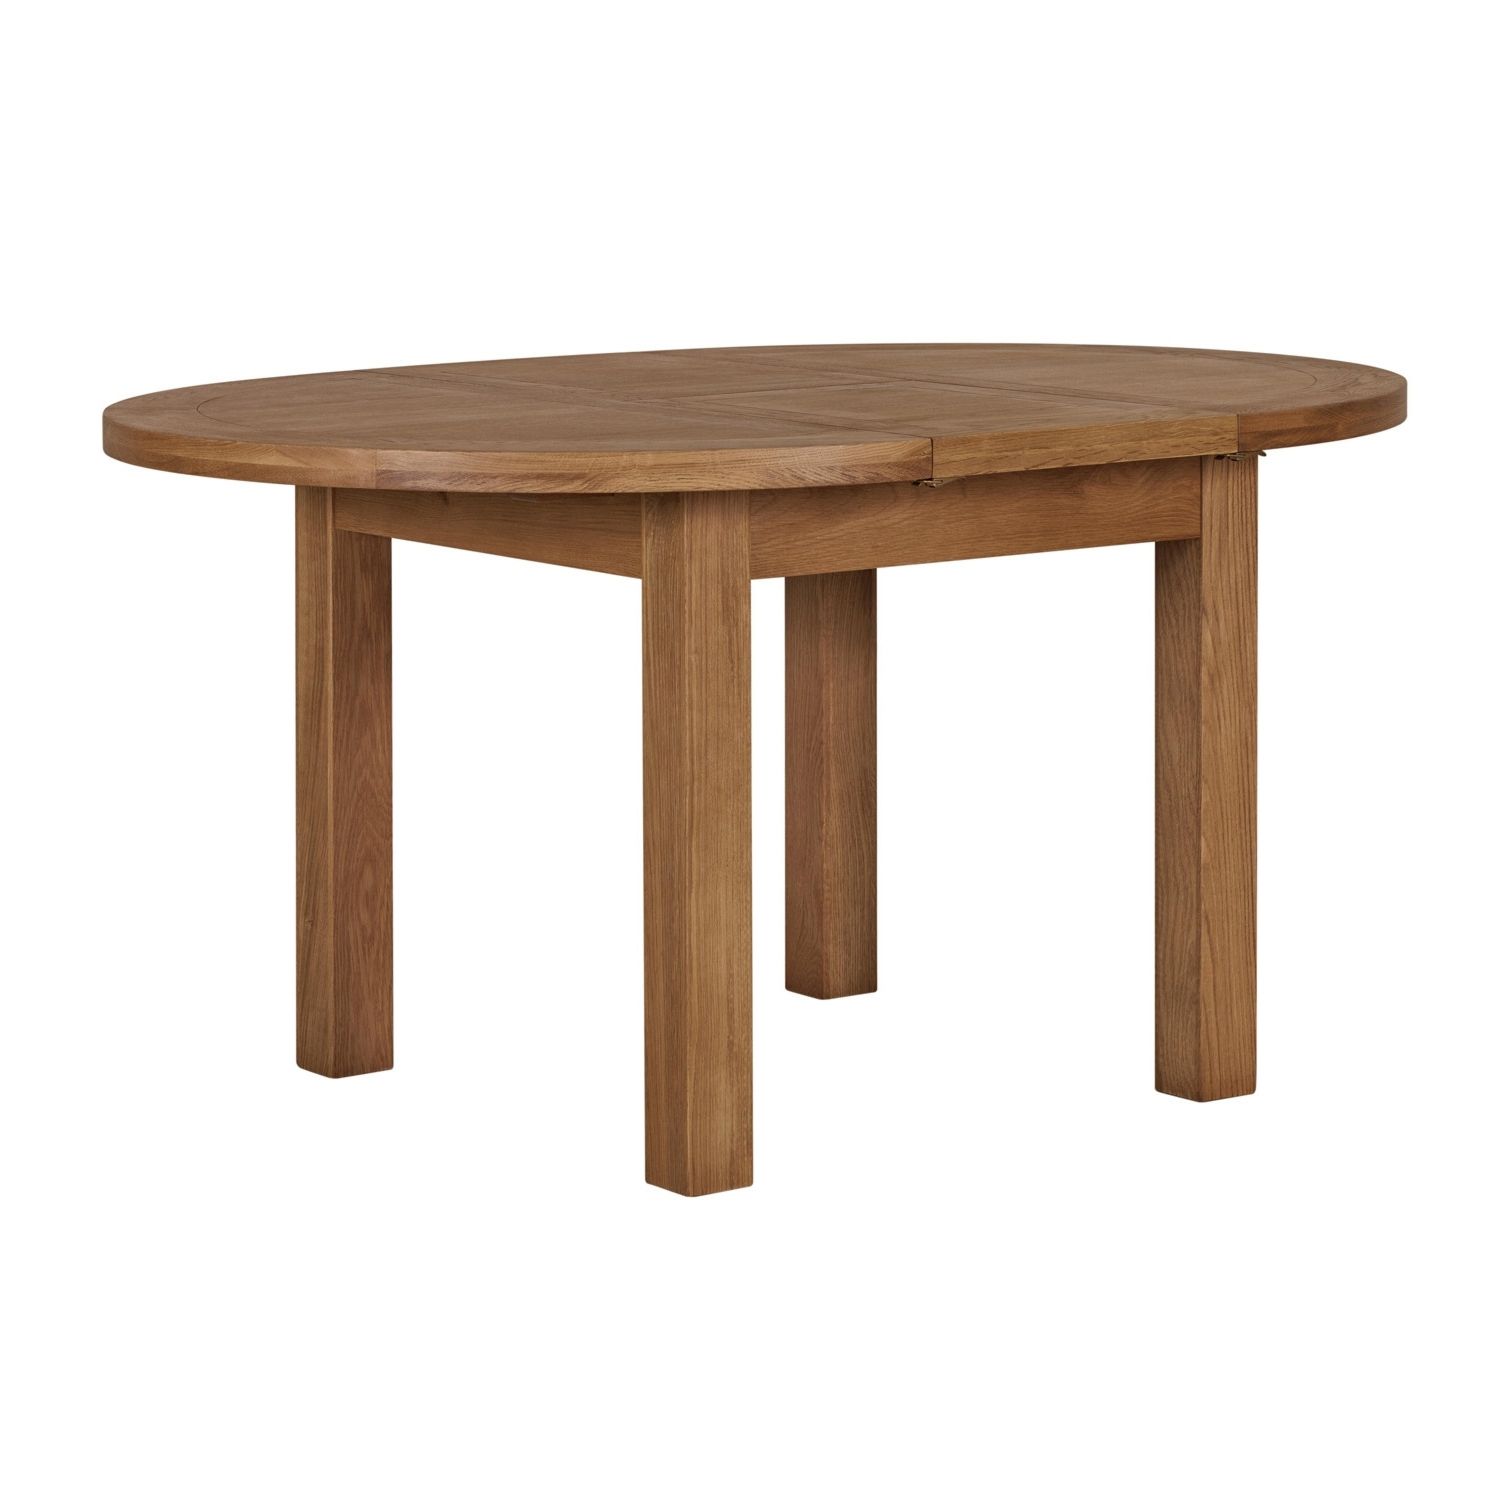 Kinsale Round Extending Dining Table Within Famous Round Extending Dining Tables (View 14 of 25)